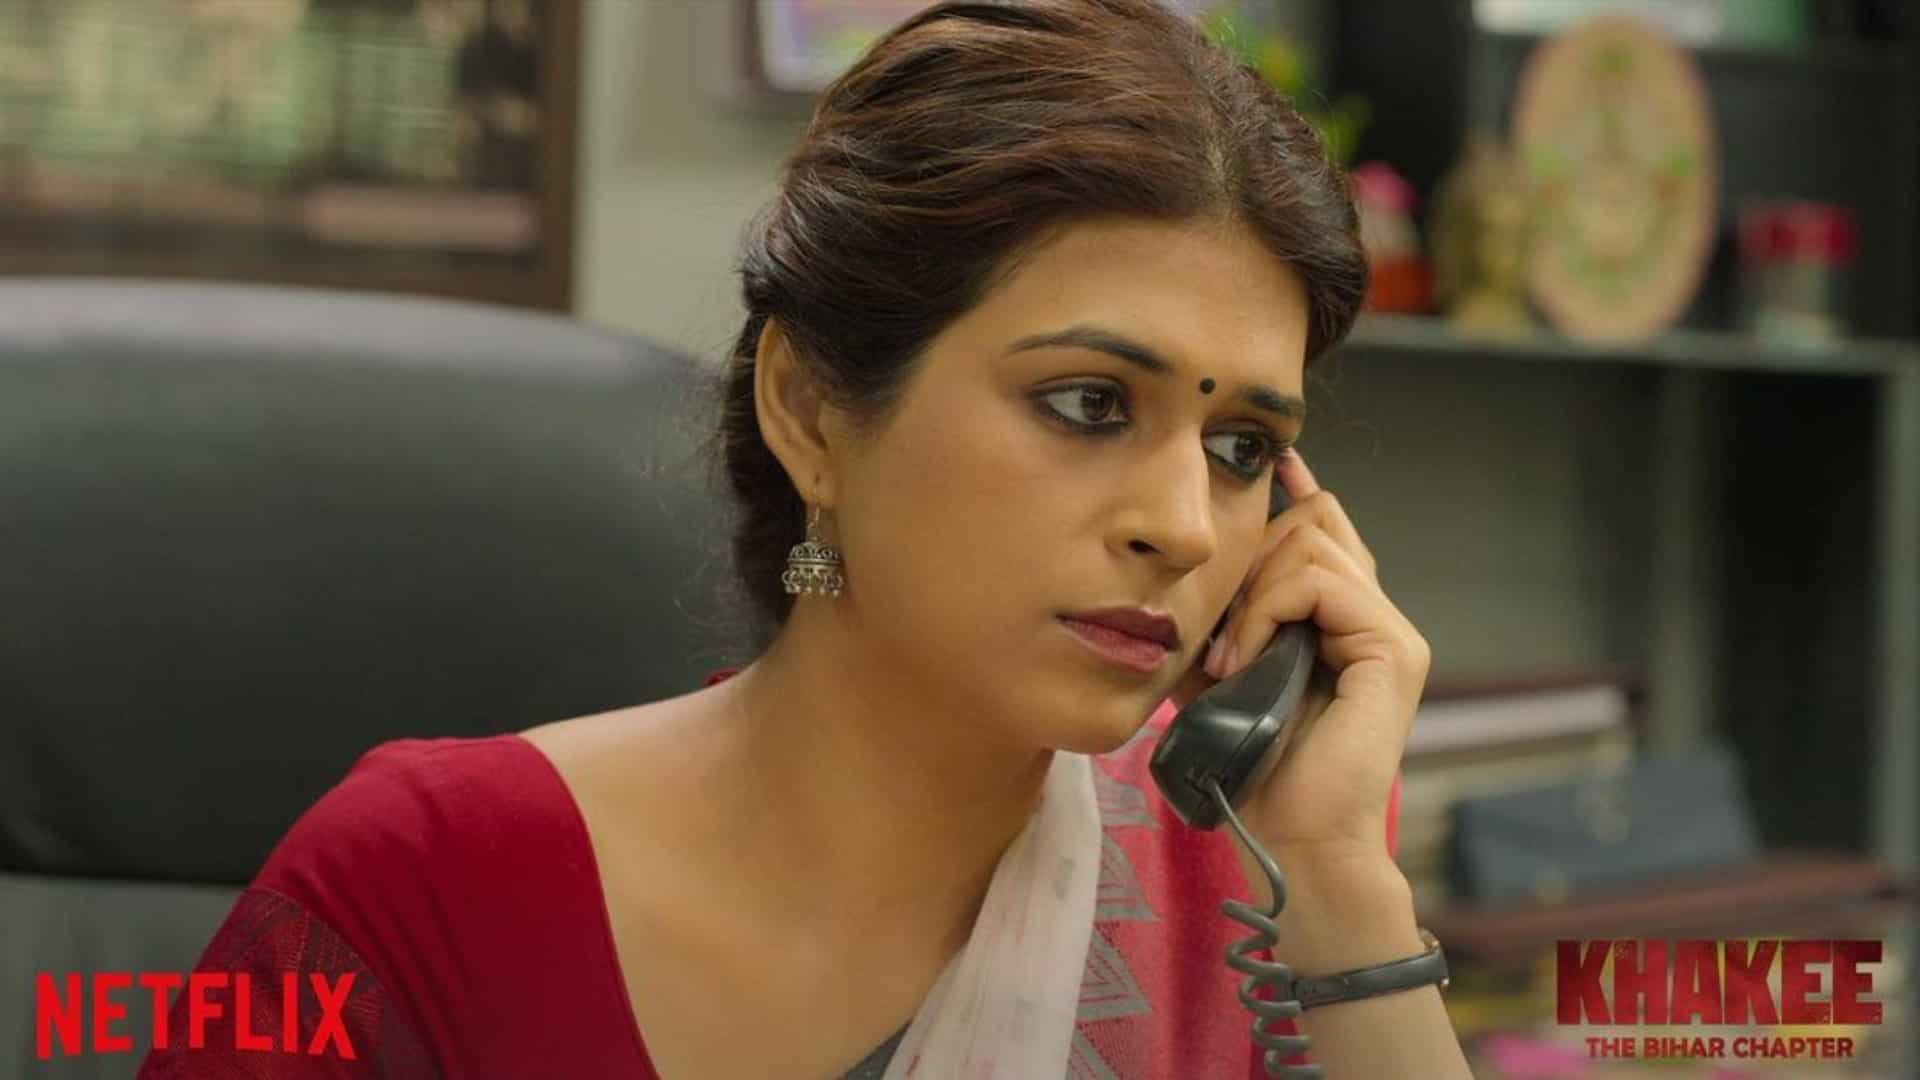 Exclusive! Spoiler Alert Did Shraddha Das just reveal something crucial about Khakee The Bihar Chapter?